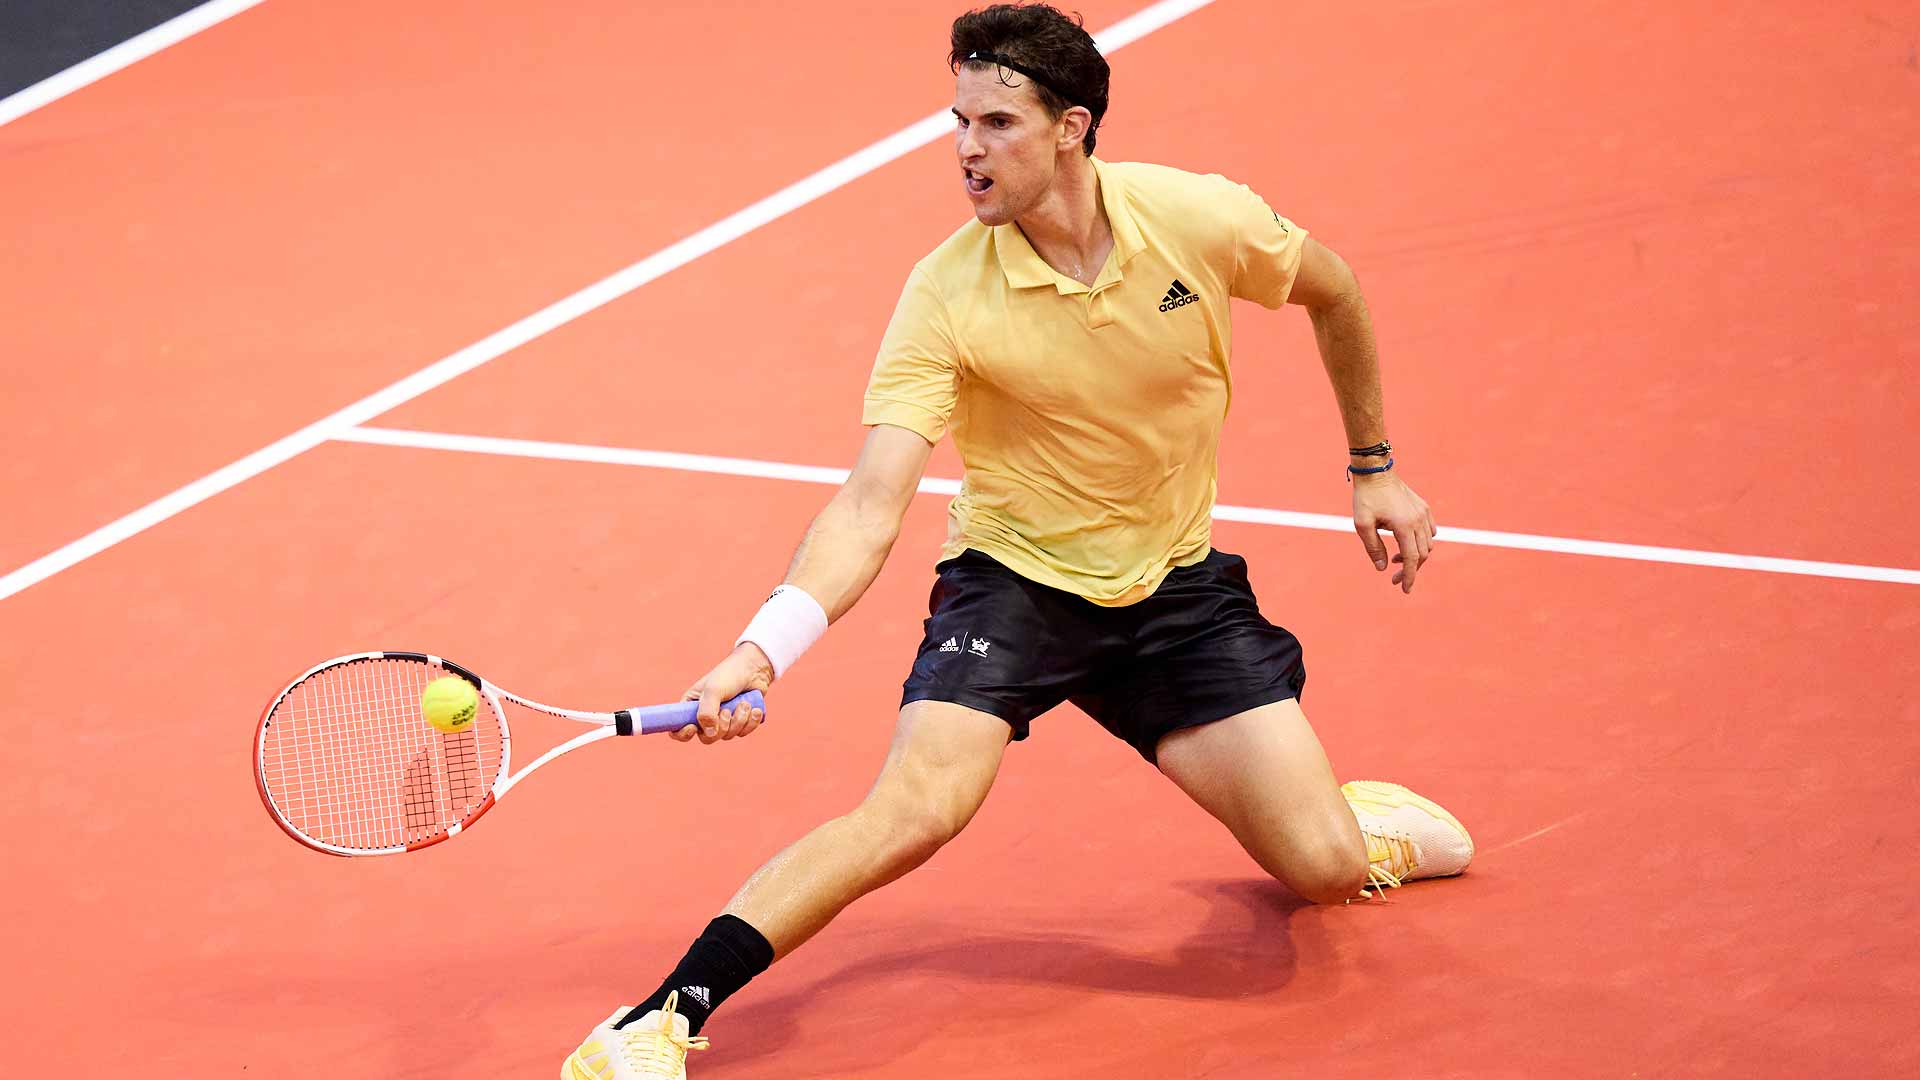 Dominic Thiem loses just two games in his first-round win against Joao Sousa in Gijon.